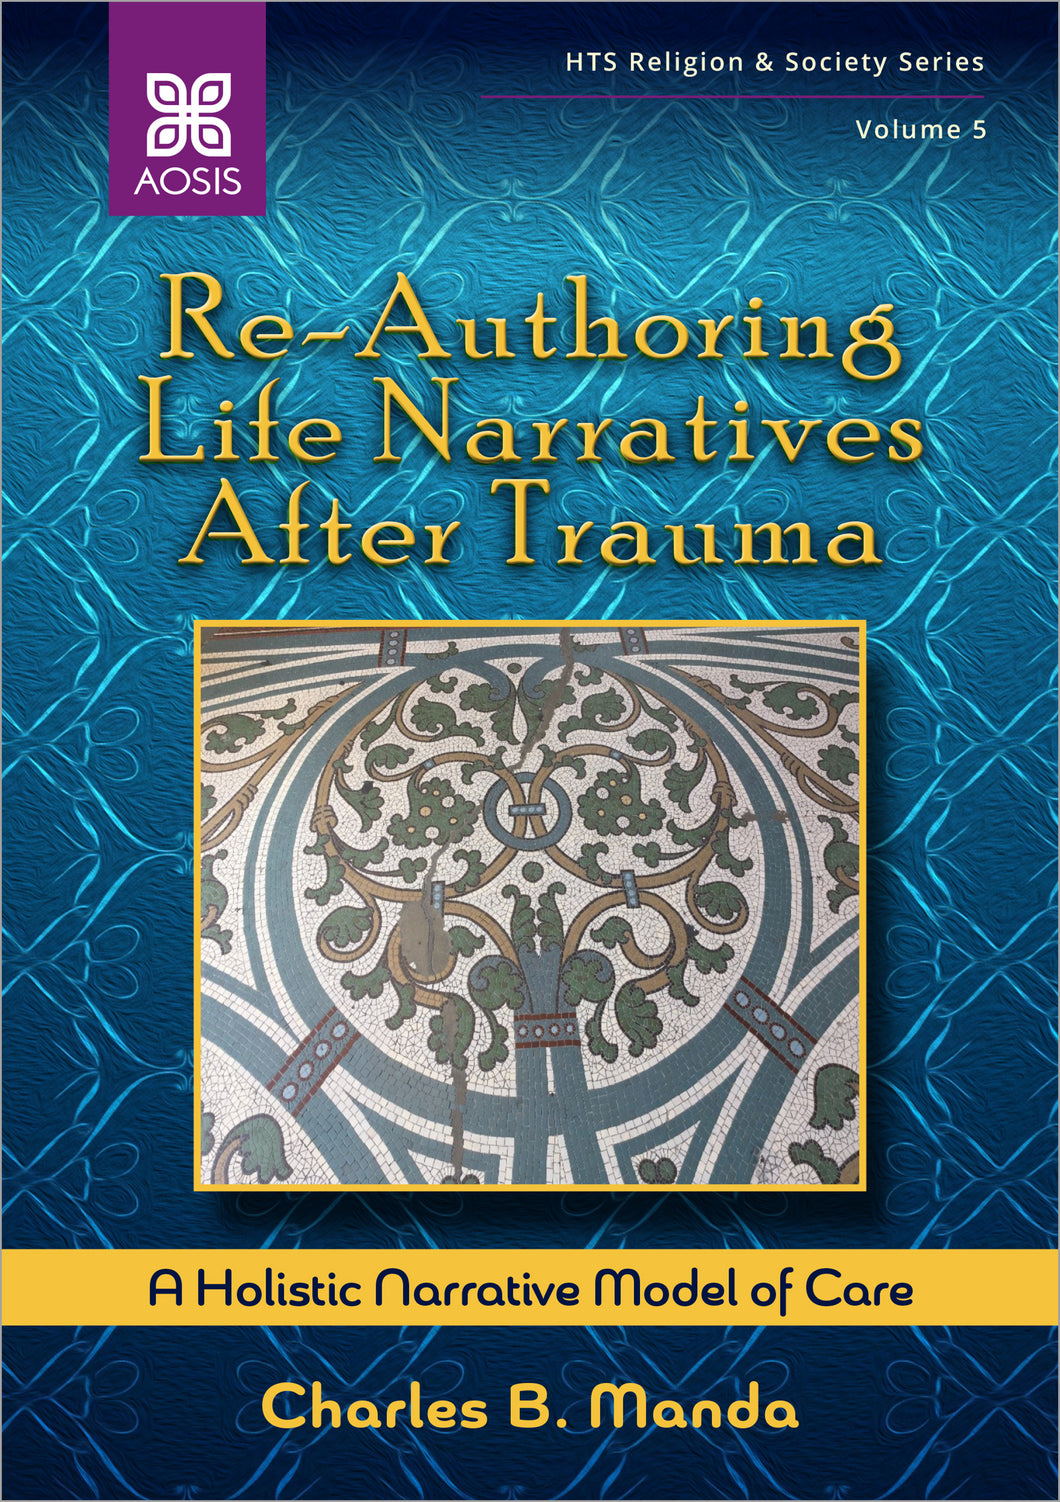 Re-Authoring Life Narratives After Trauma: A Holistic Narrative Model of Care (Hardcover - Collectors Item)